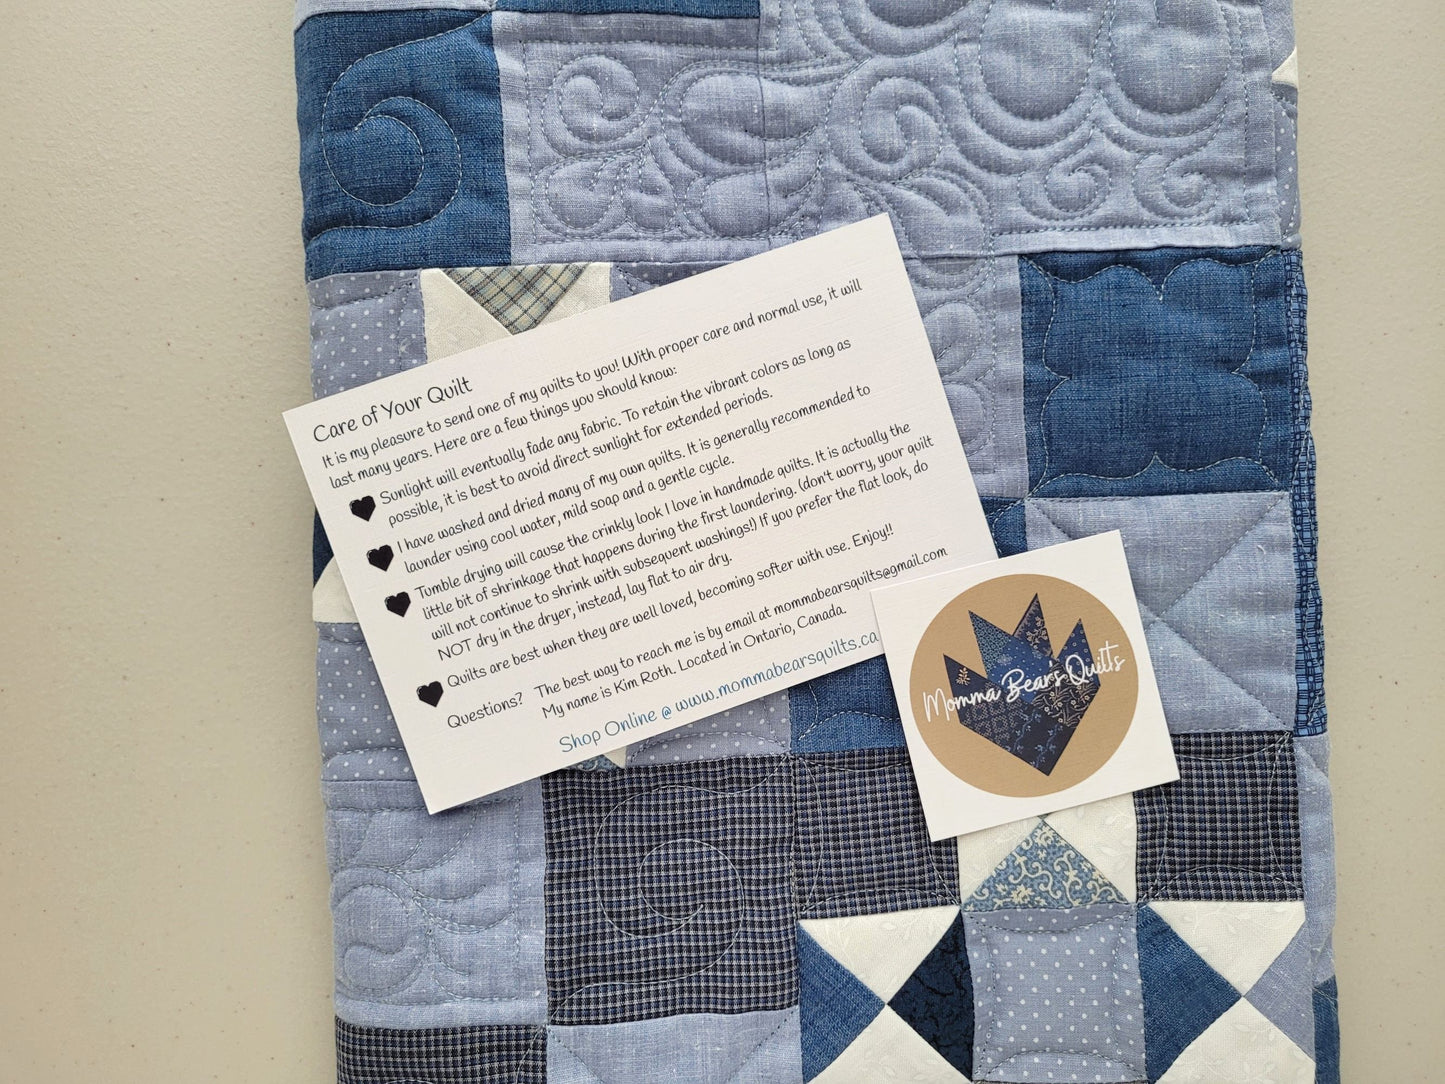 quilted table runner with care instructions